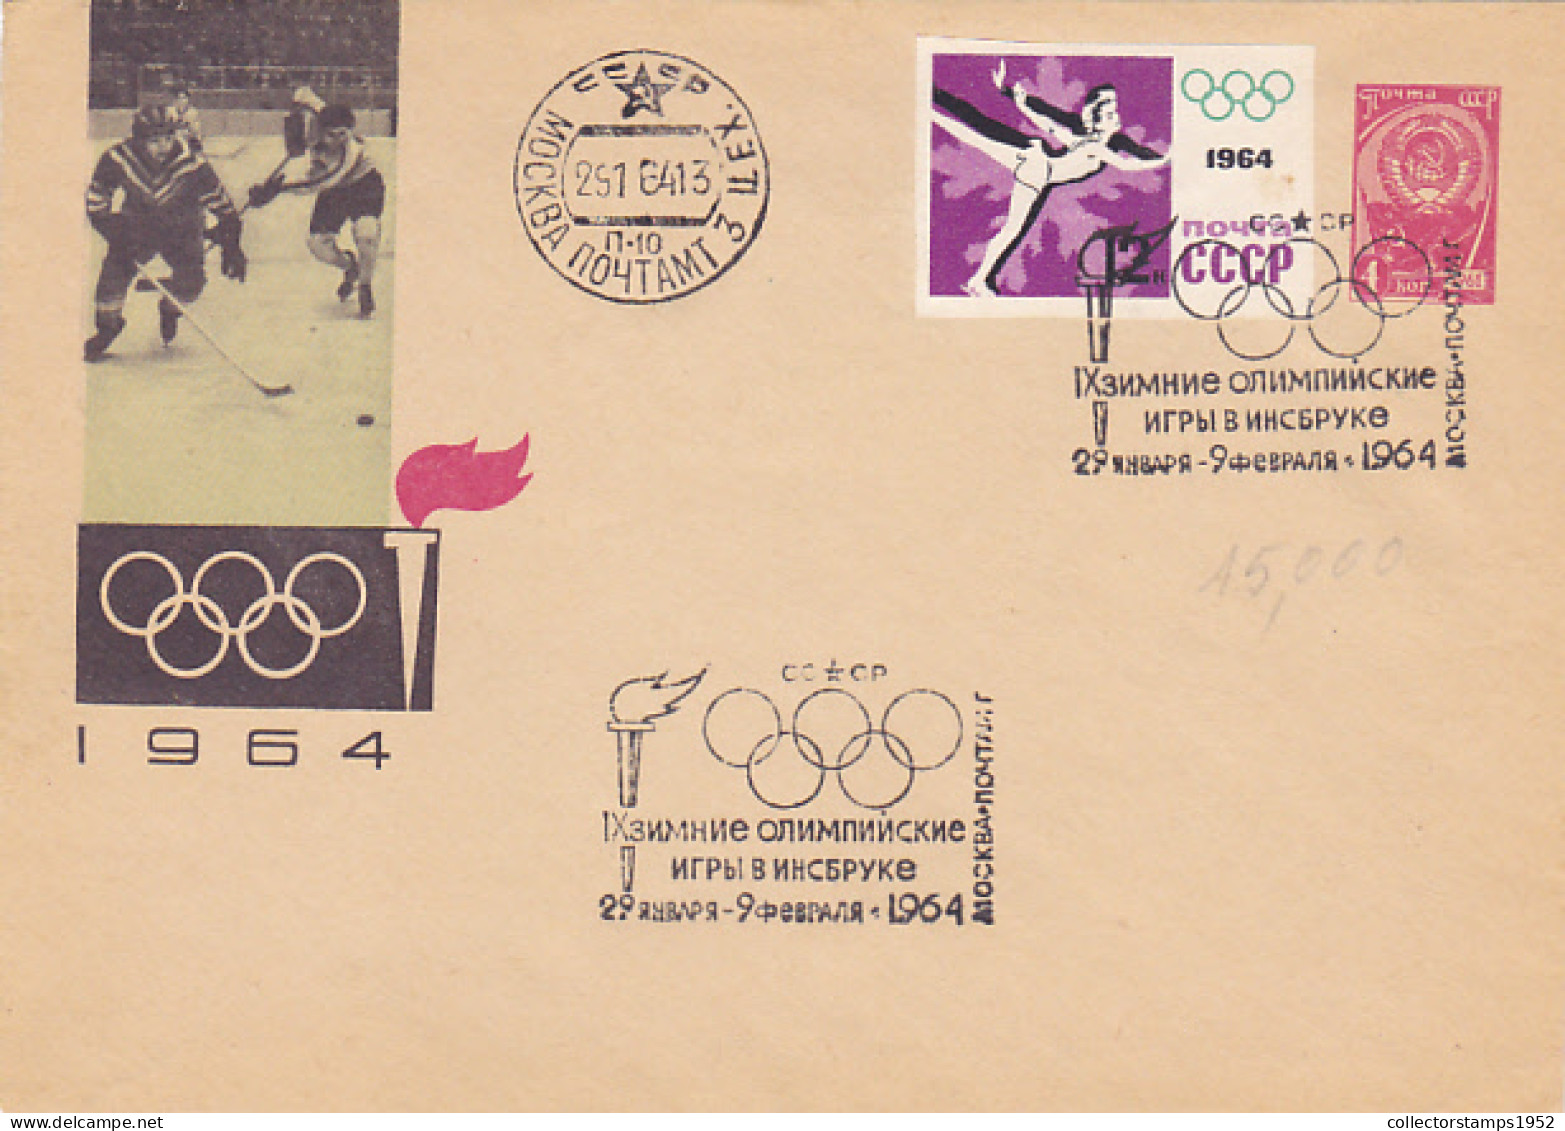 ICE HOCKEY, FIGURE SKATING, INNSBRUCK'64 WINTER OLYMPIC GAMES, SPECIAL COVER, 1964, RUSSIA-USSR - Hiver 1964: Innsbruck